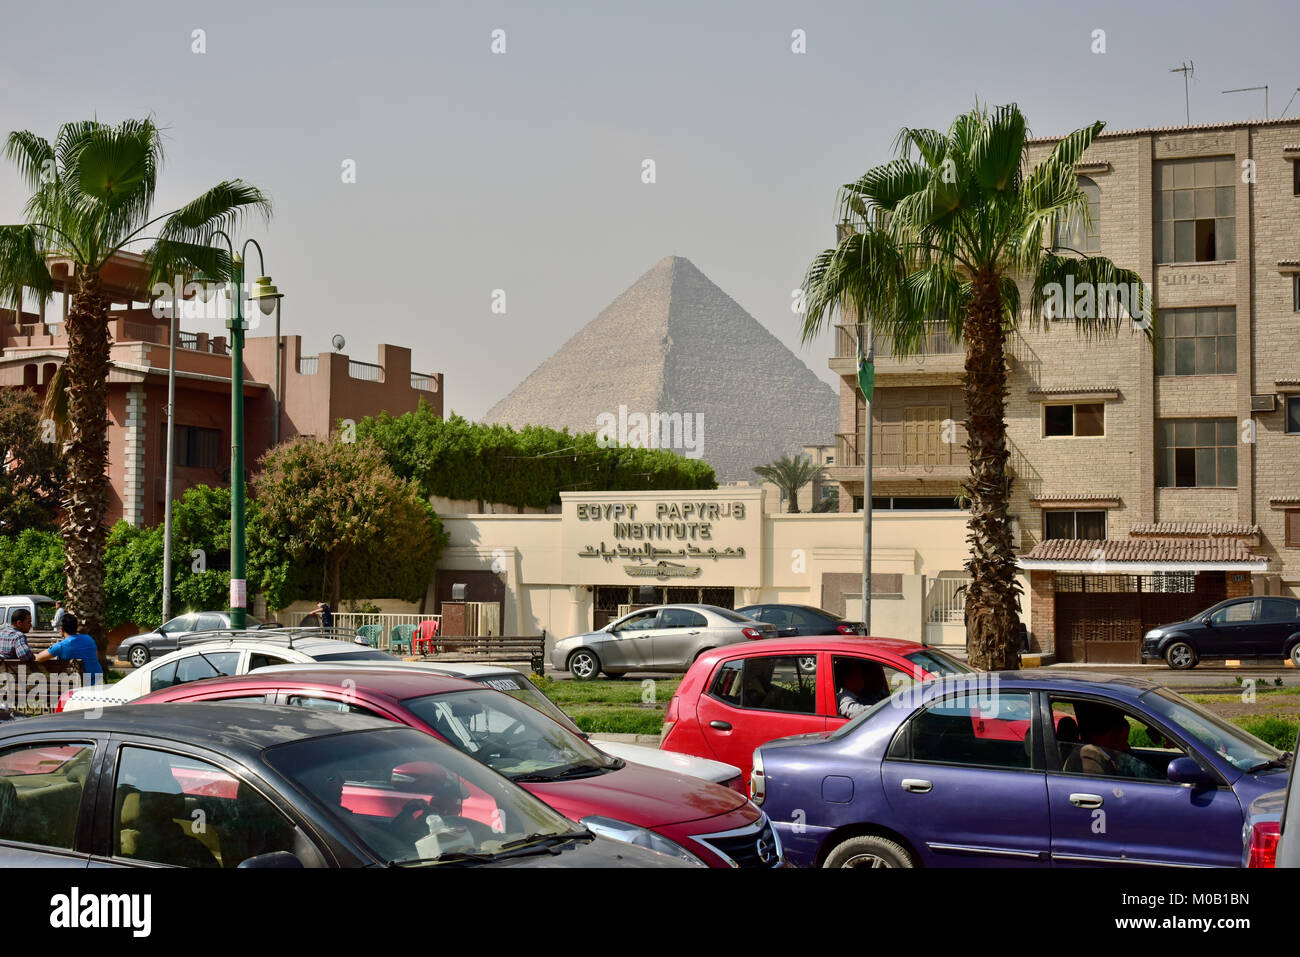 The Great Pyramid of Giza (also known as the Pyramid of Khufu, or the Pyramid of Cheops) as seen from across from the Egypt Papyrus Institute in Giza. Stock Photo